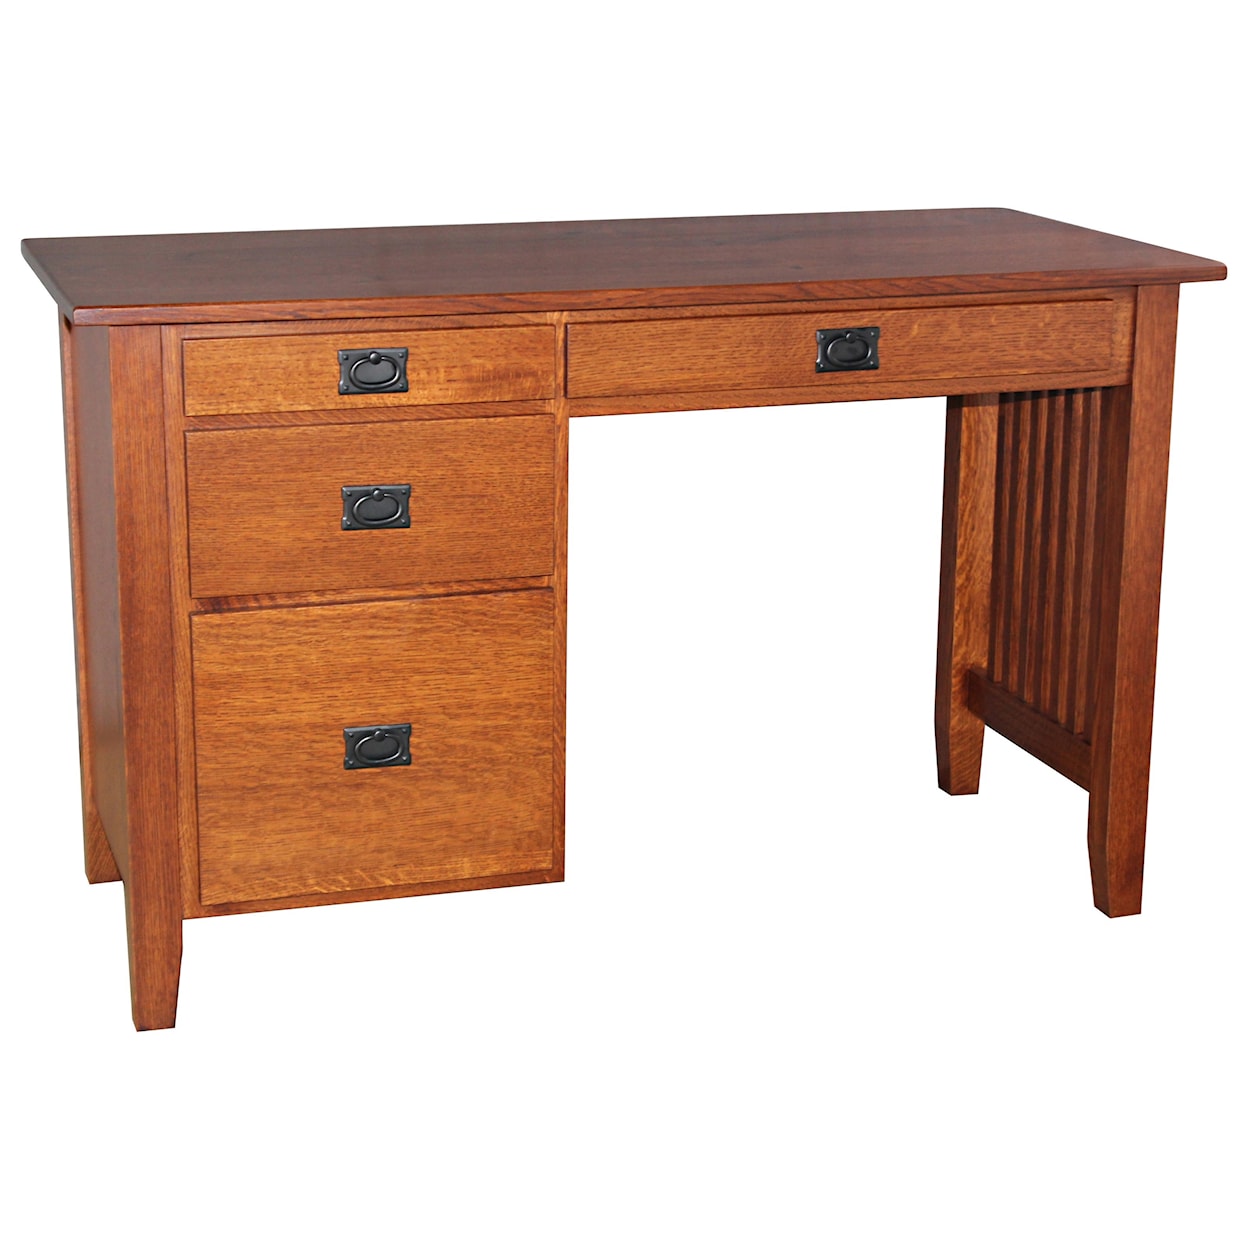 Ashery Woodworking Prairie Mission Student Desk